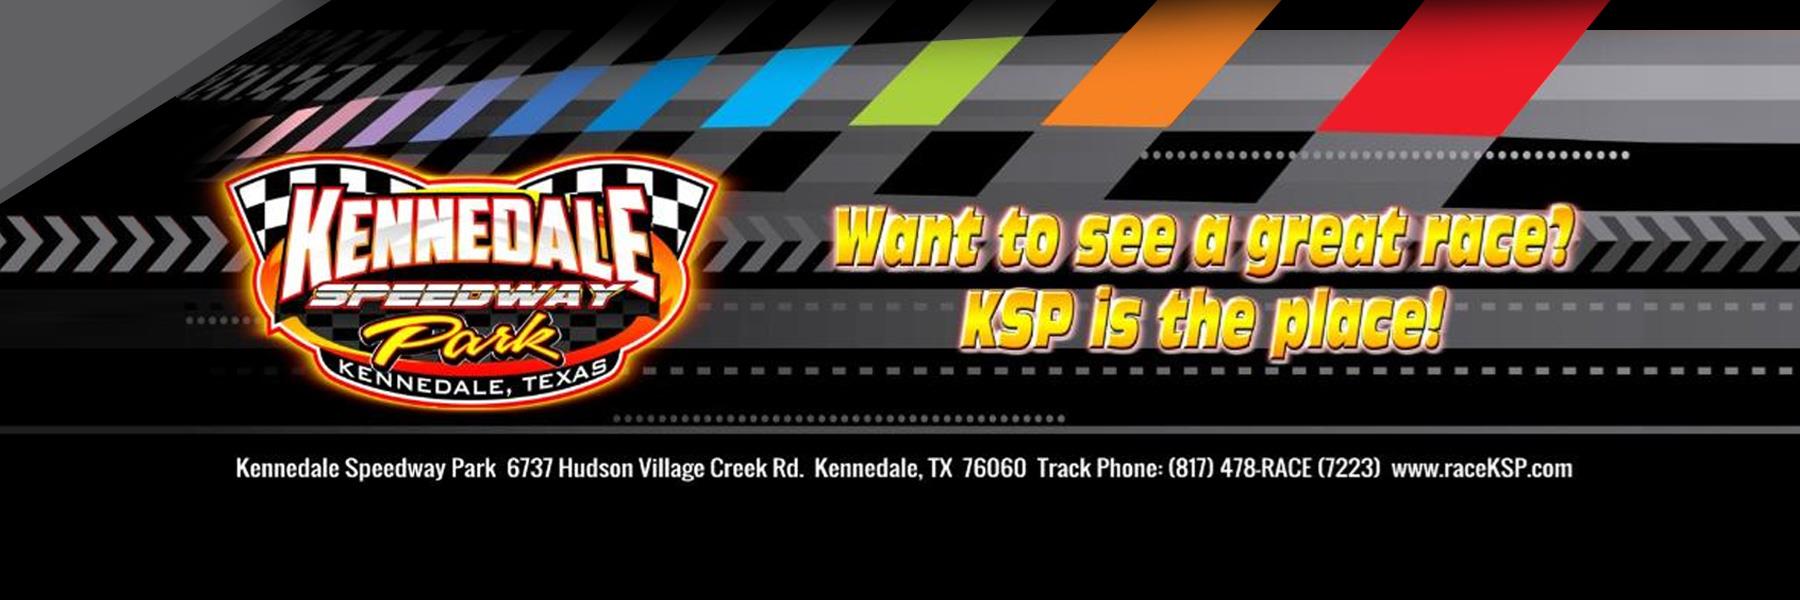 9/4/2021 - Kennedale Speedway Park